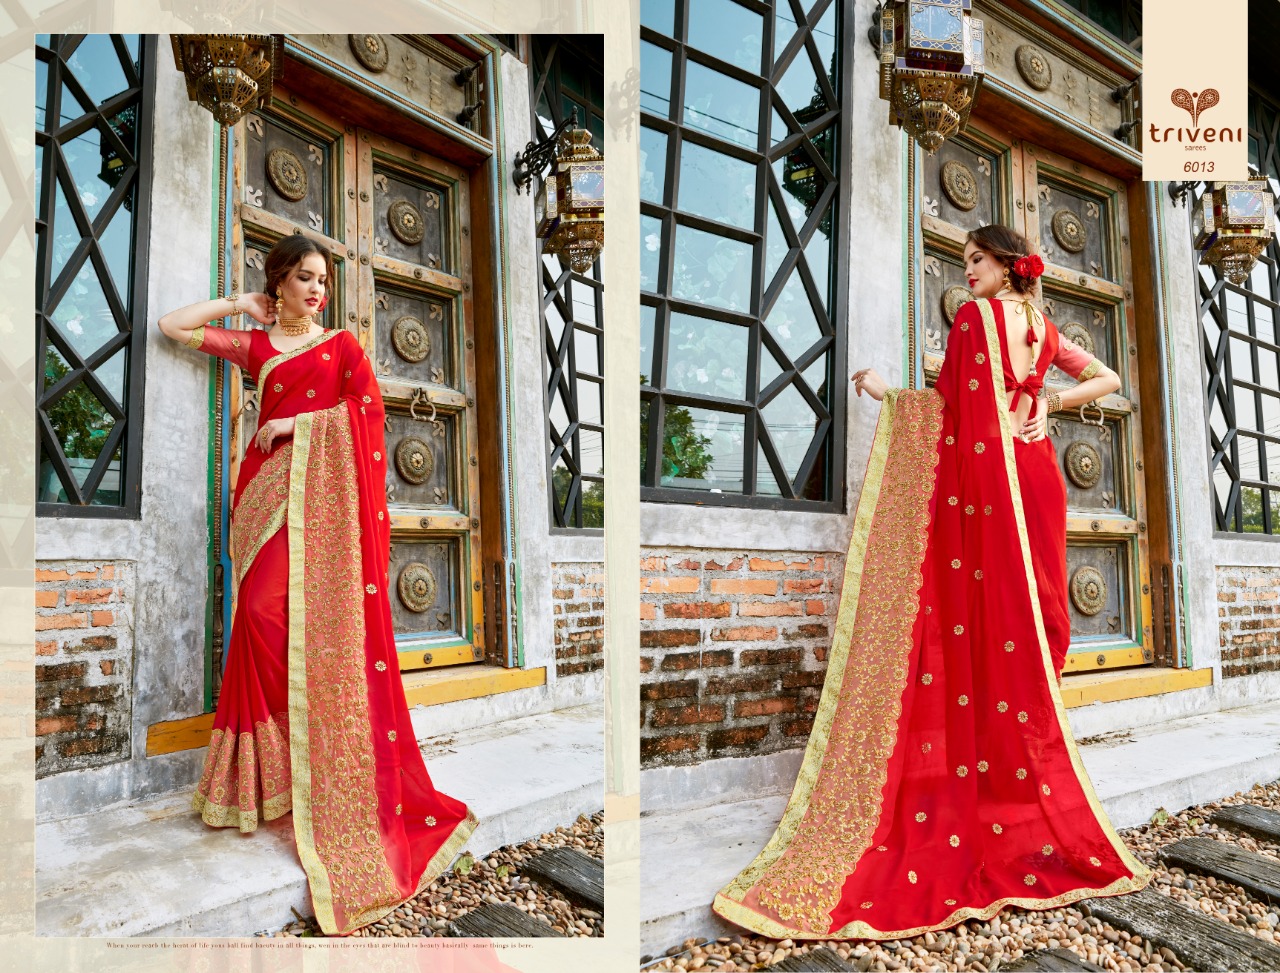 triveni julitte colorful beautiful collection of sarees at reasonable rate